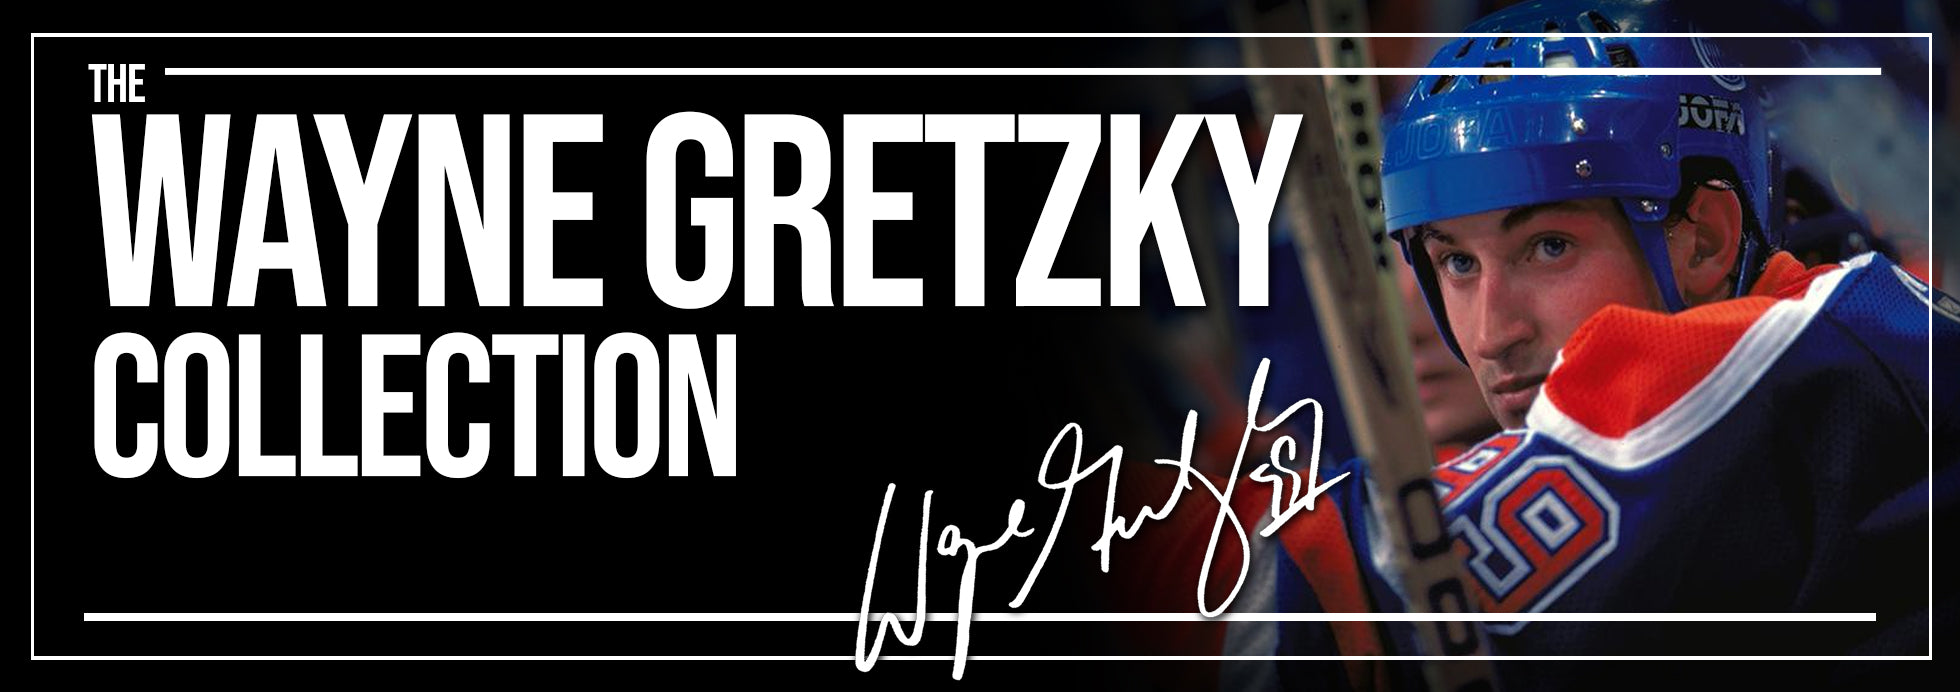 Wayne Gretzky Collection Banner